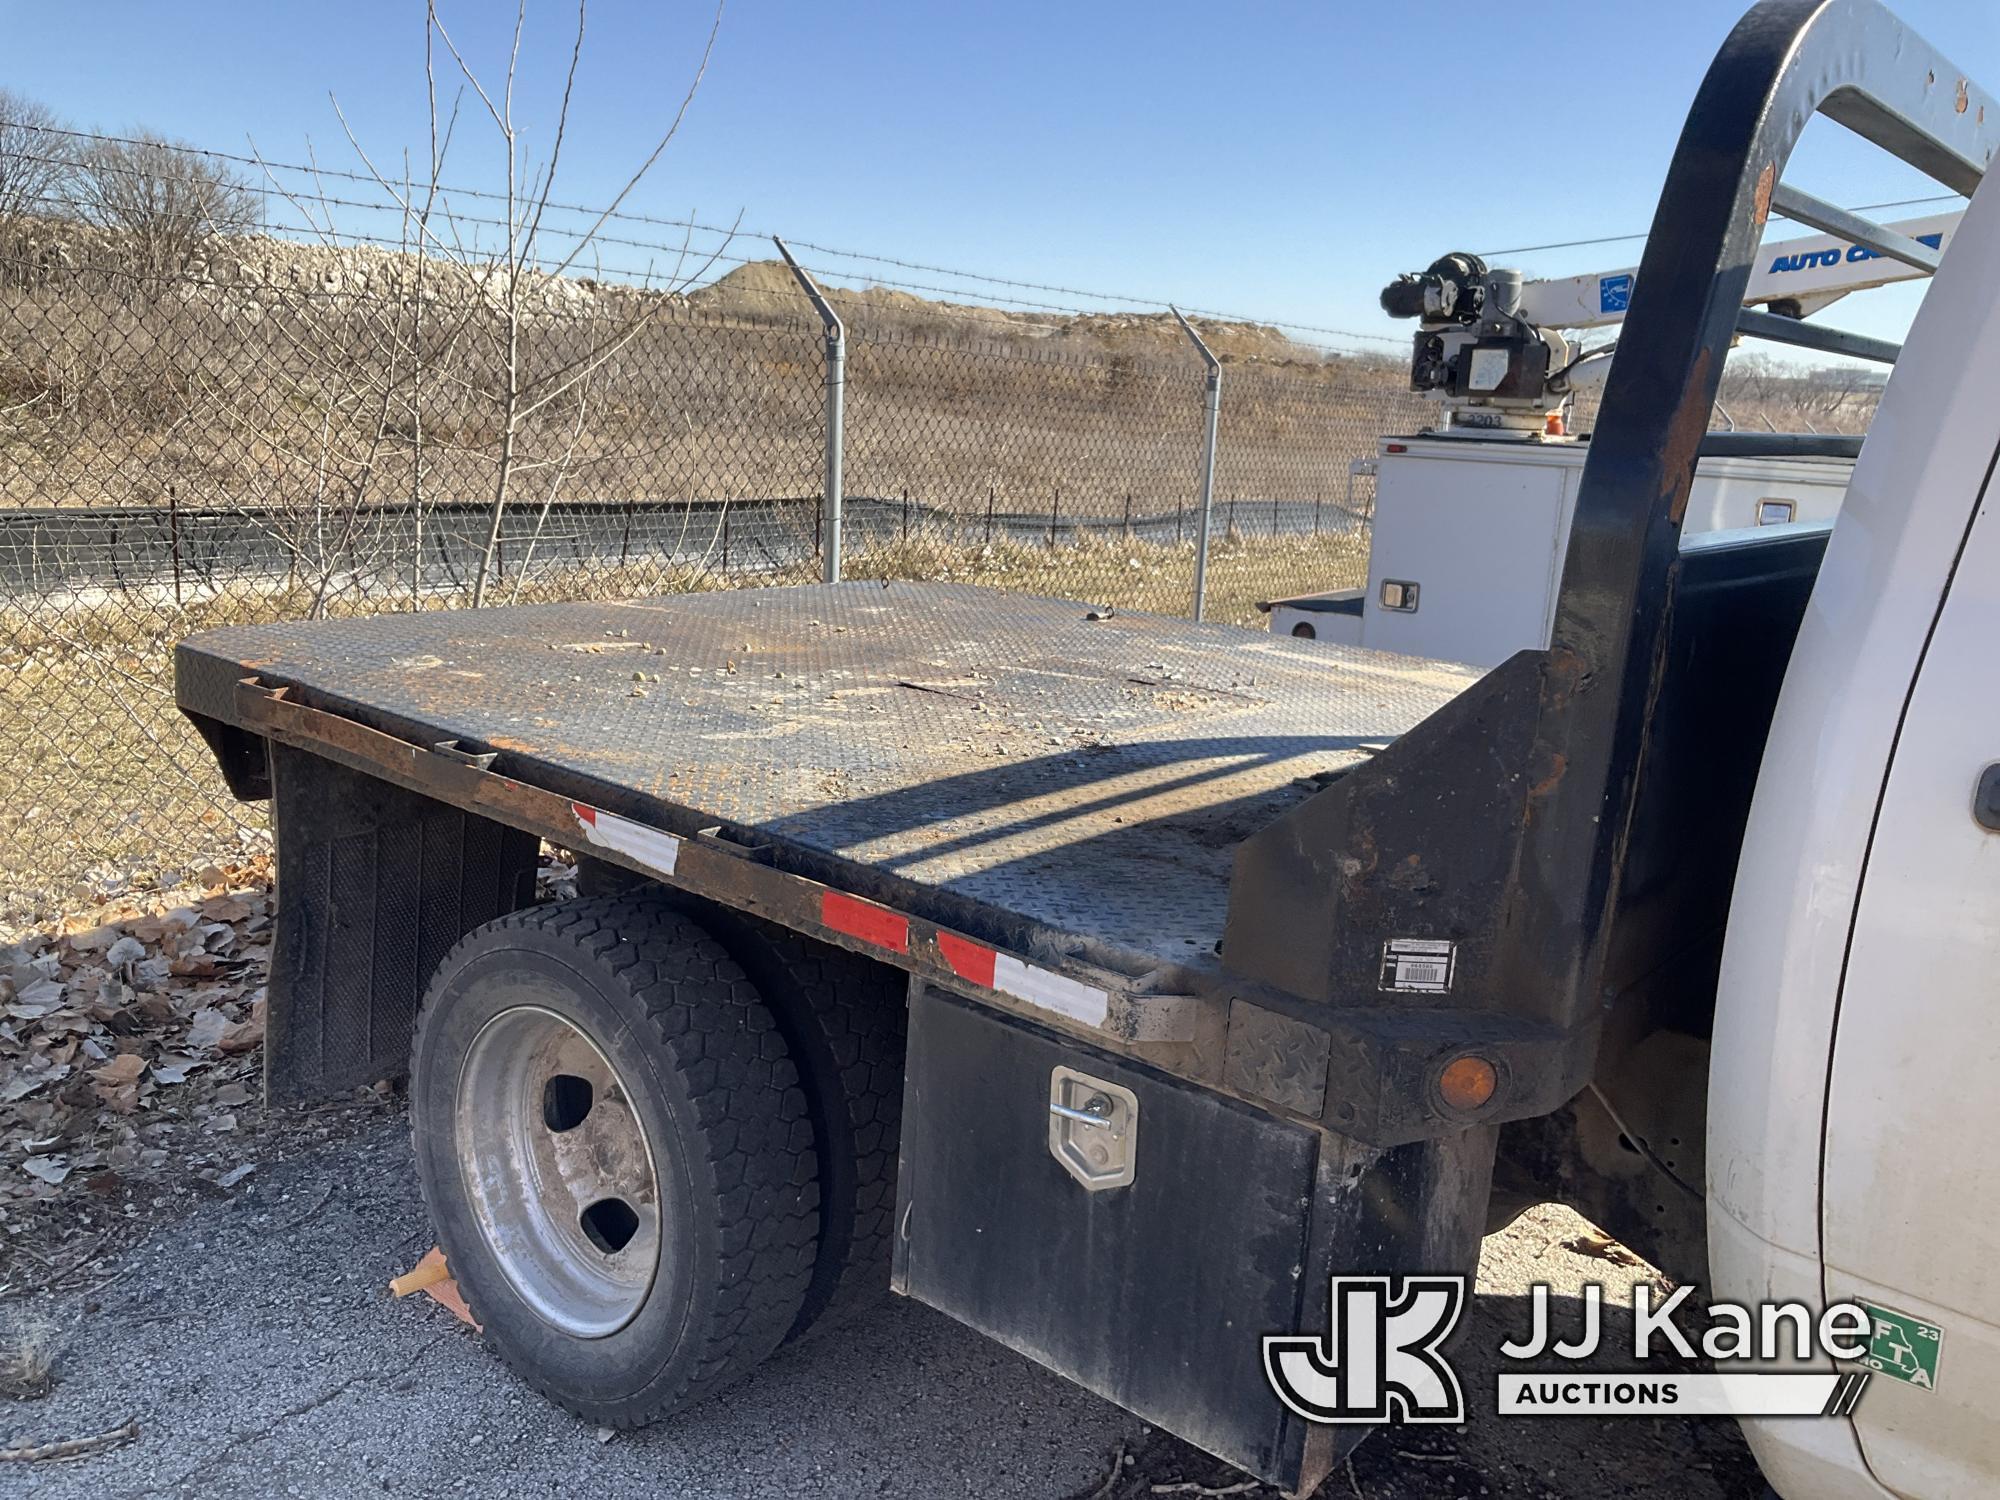 (Kansas City, MO) 2017 RAM 5500 4x4 Flatbed Truck Starts W/ Jump, Will Not Stay Running, Wrecked In